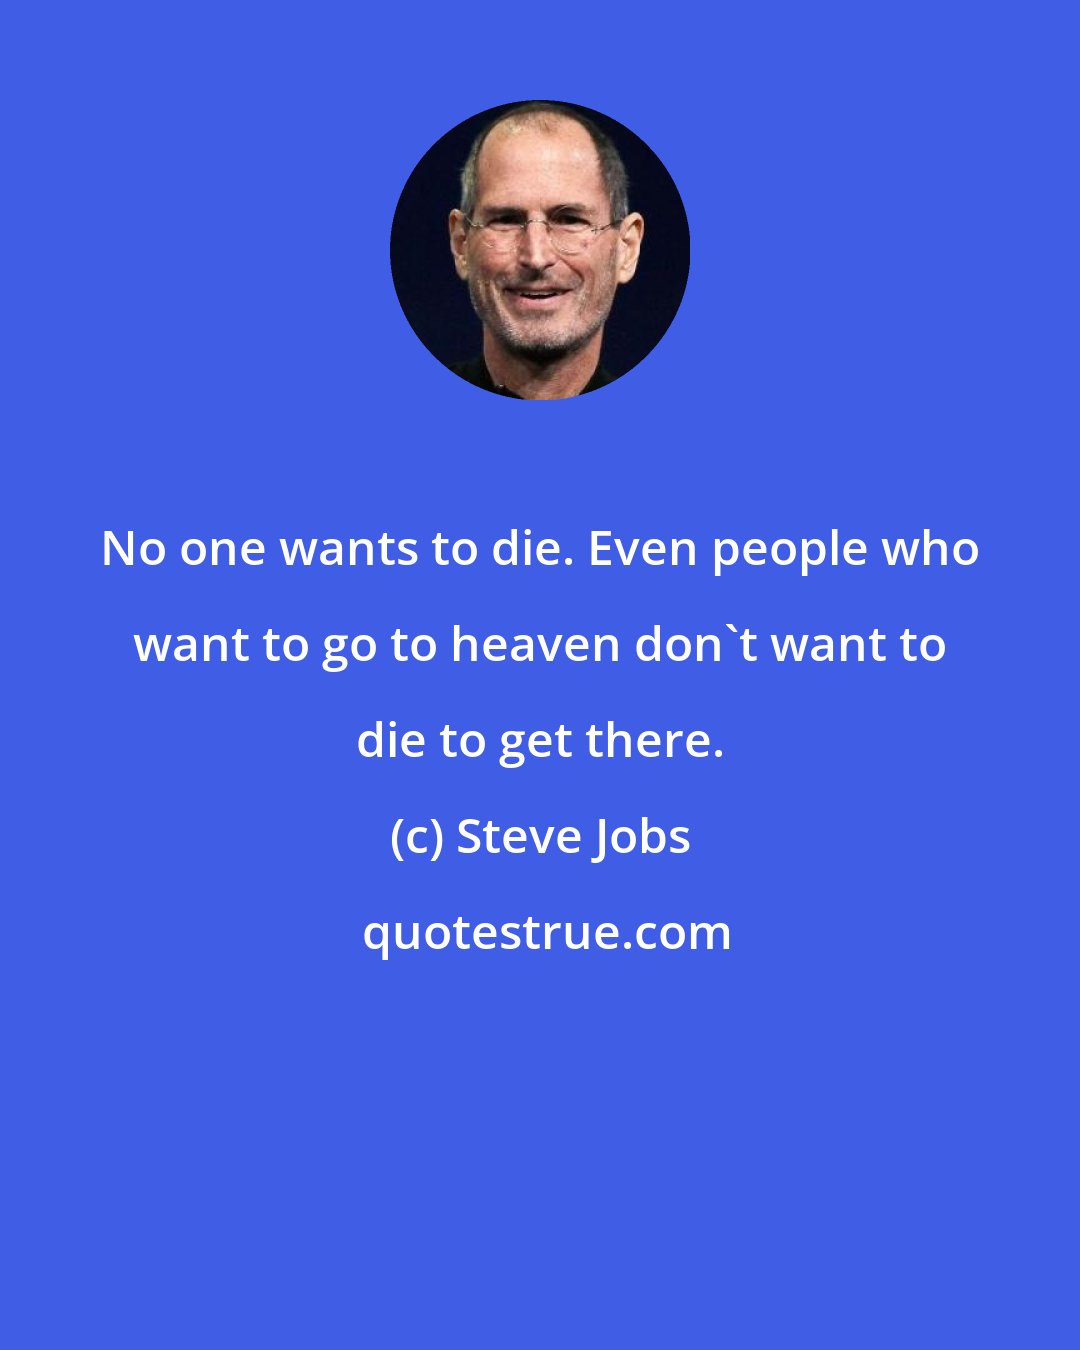 Steve Jobs: No one wants to die. Even people who want to go to heaven don't want to die to get there.